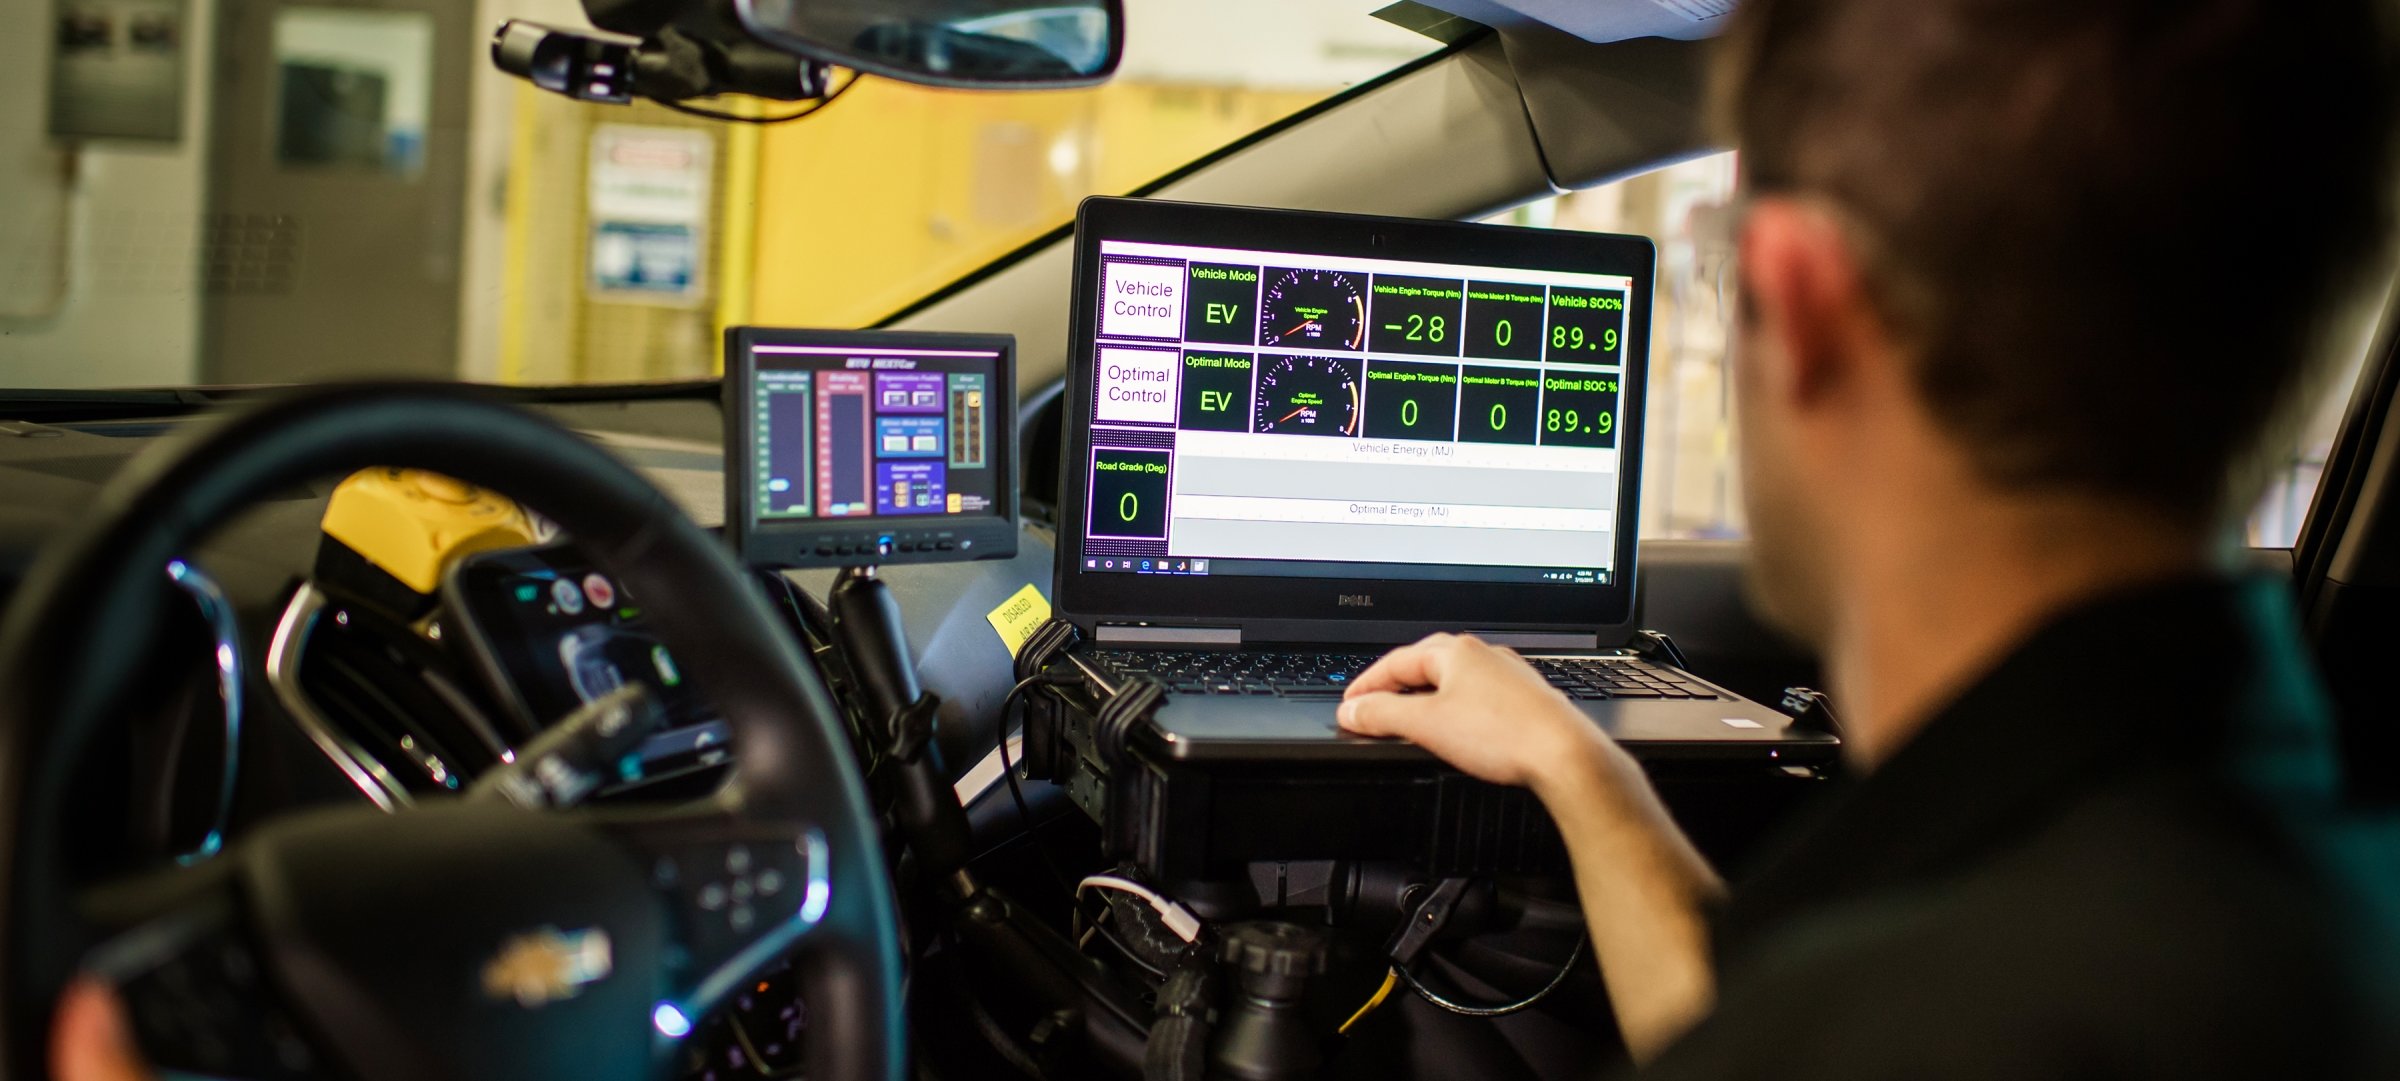 A student inside a car with laptops and monitors